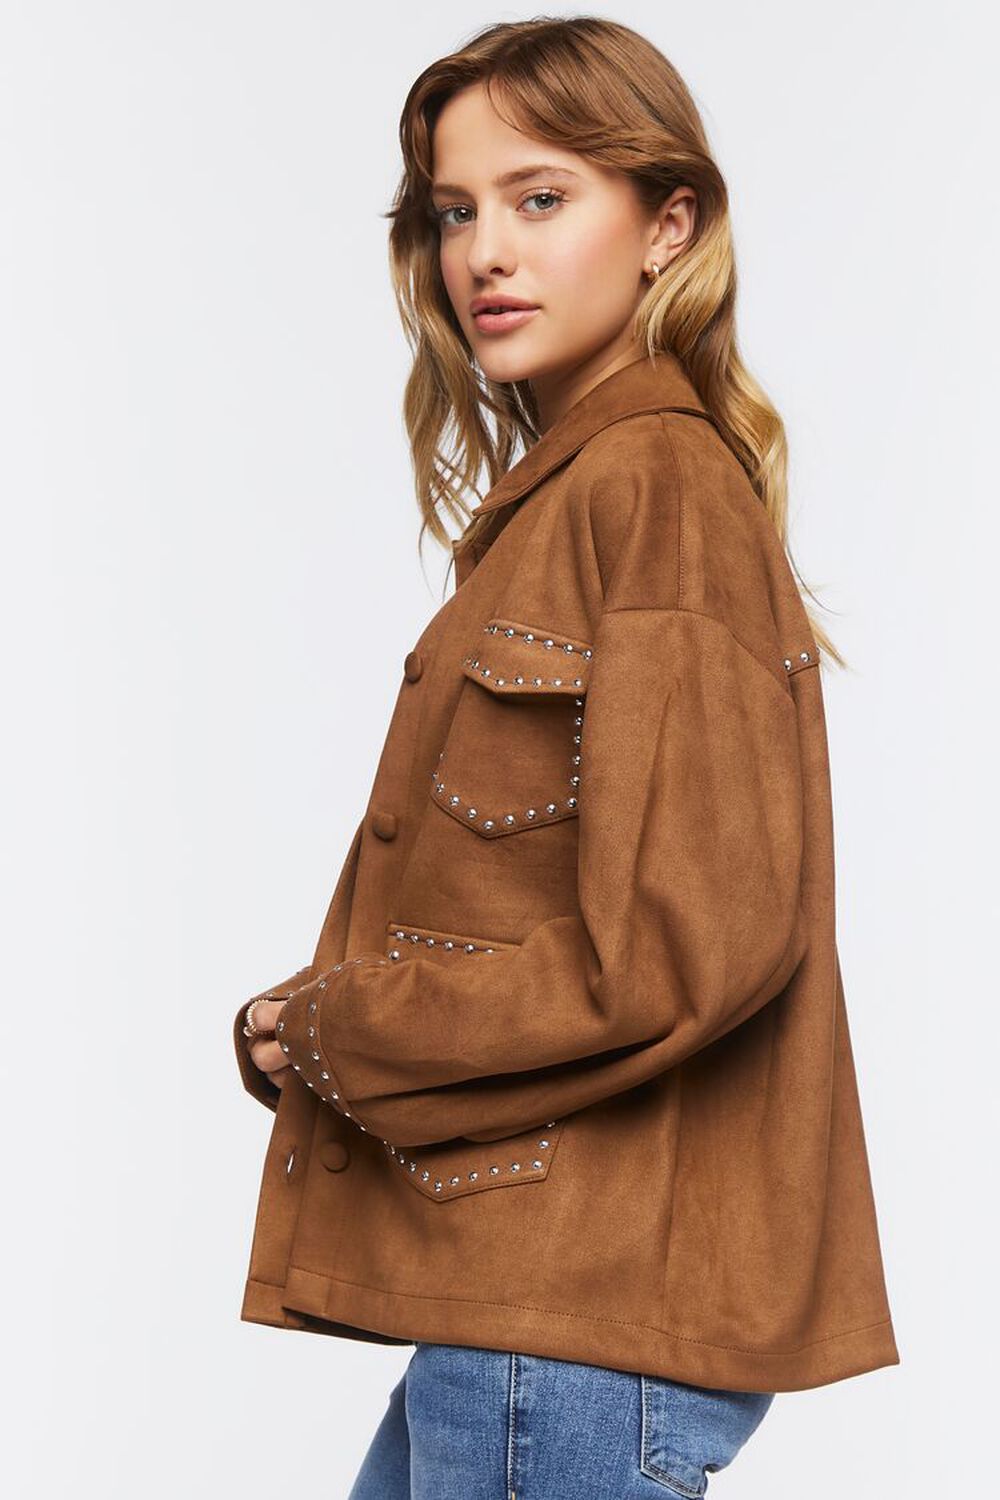 BROWN Faux Suede Studded Shacket, image 2